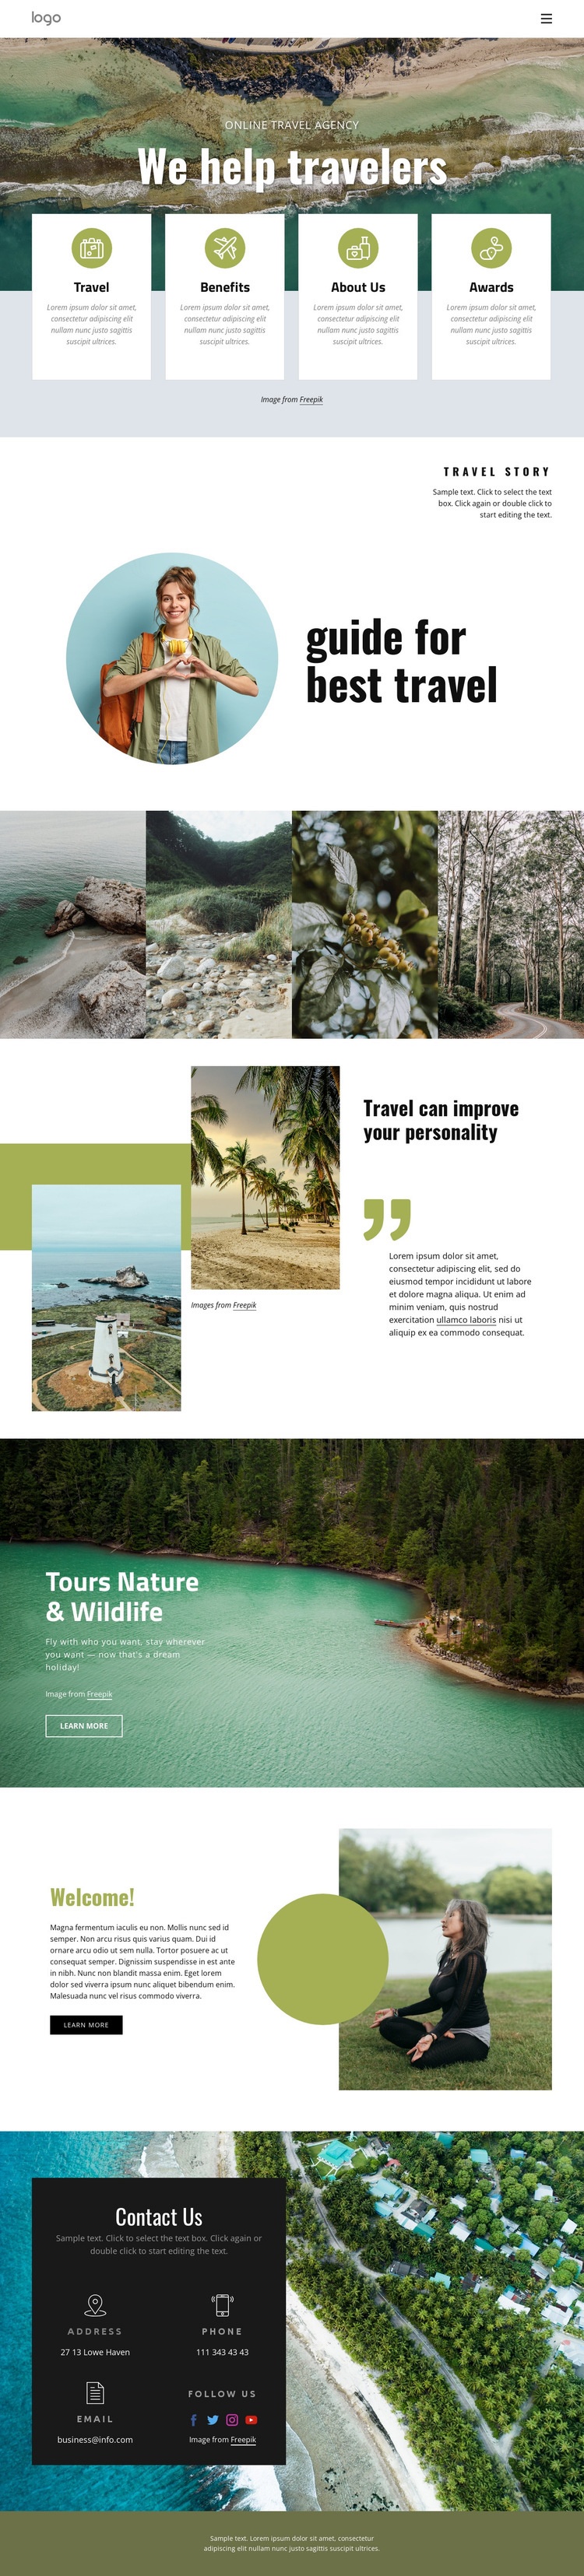 We help manage your trip Homepage Design